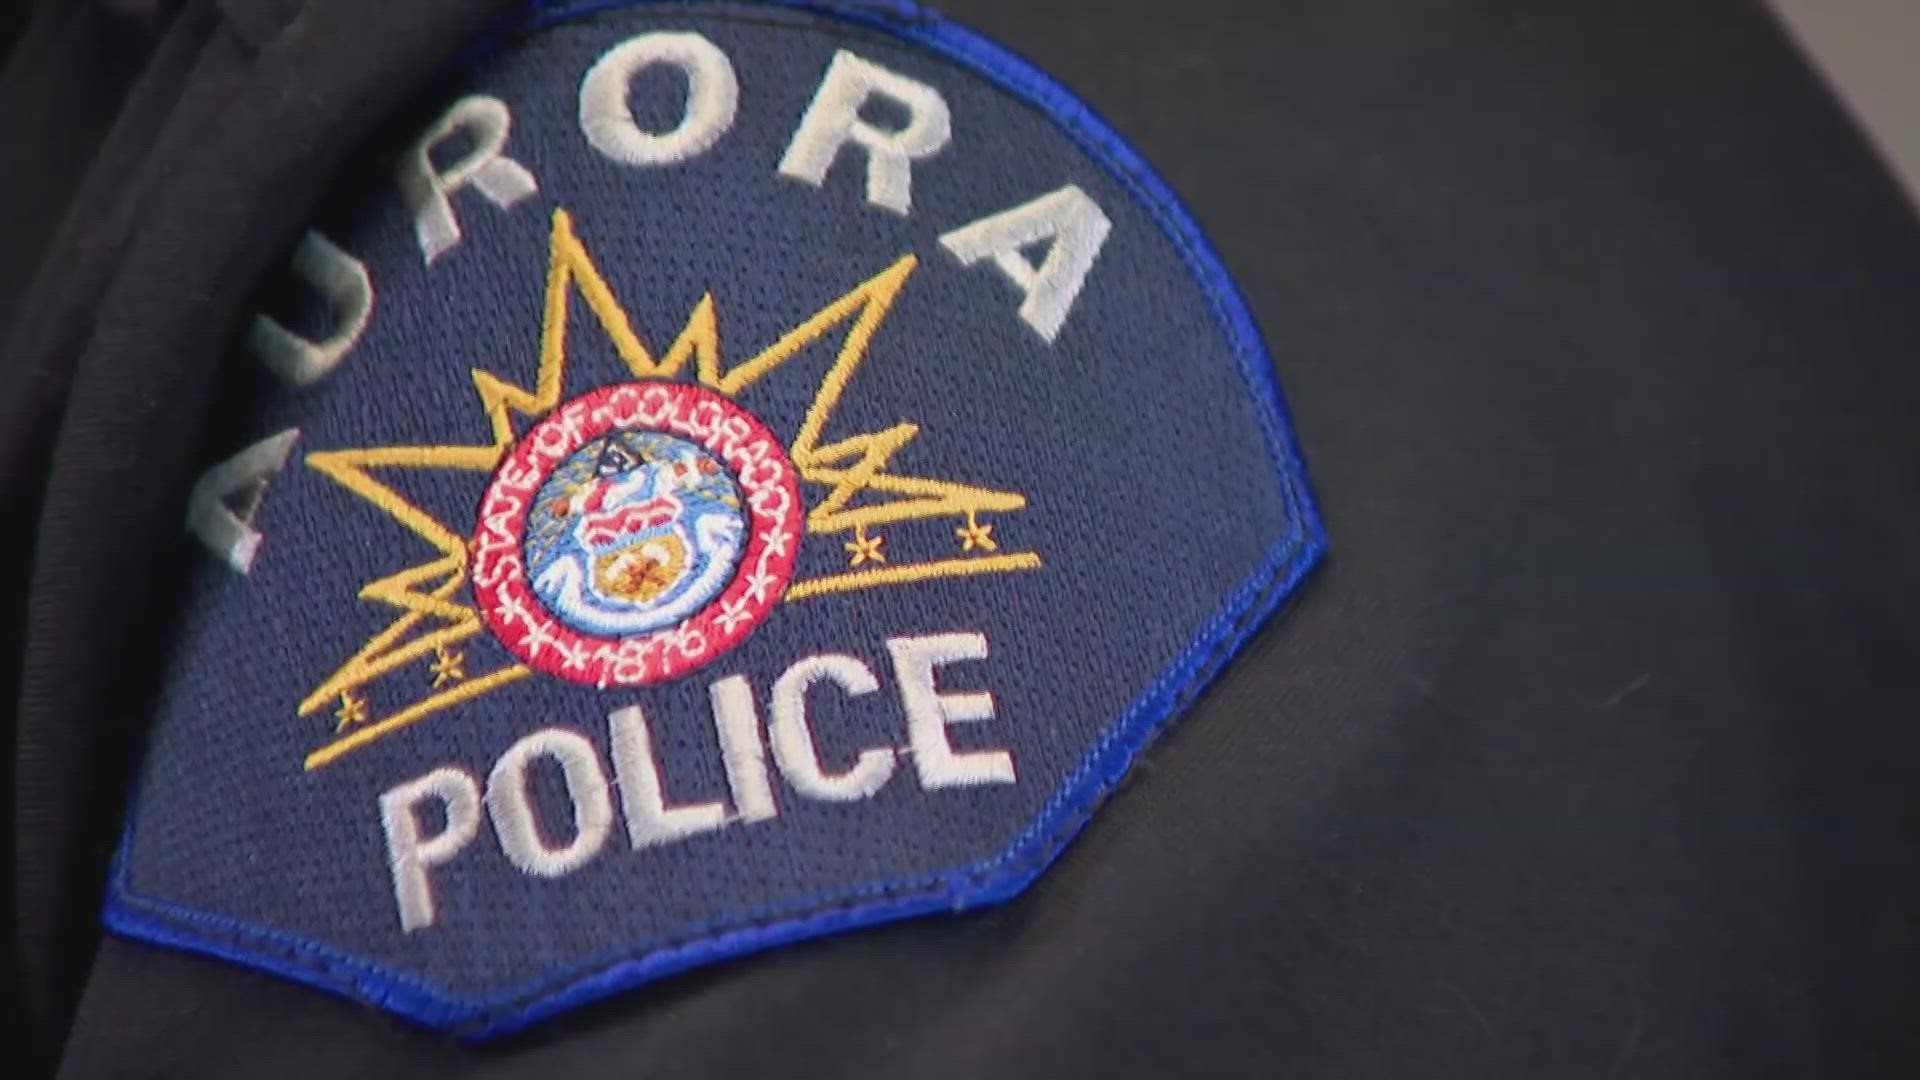 The independent monitor's progress report shared concerns about missed deadlines and the Aurora Police Department's review of force used by its officers.